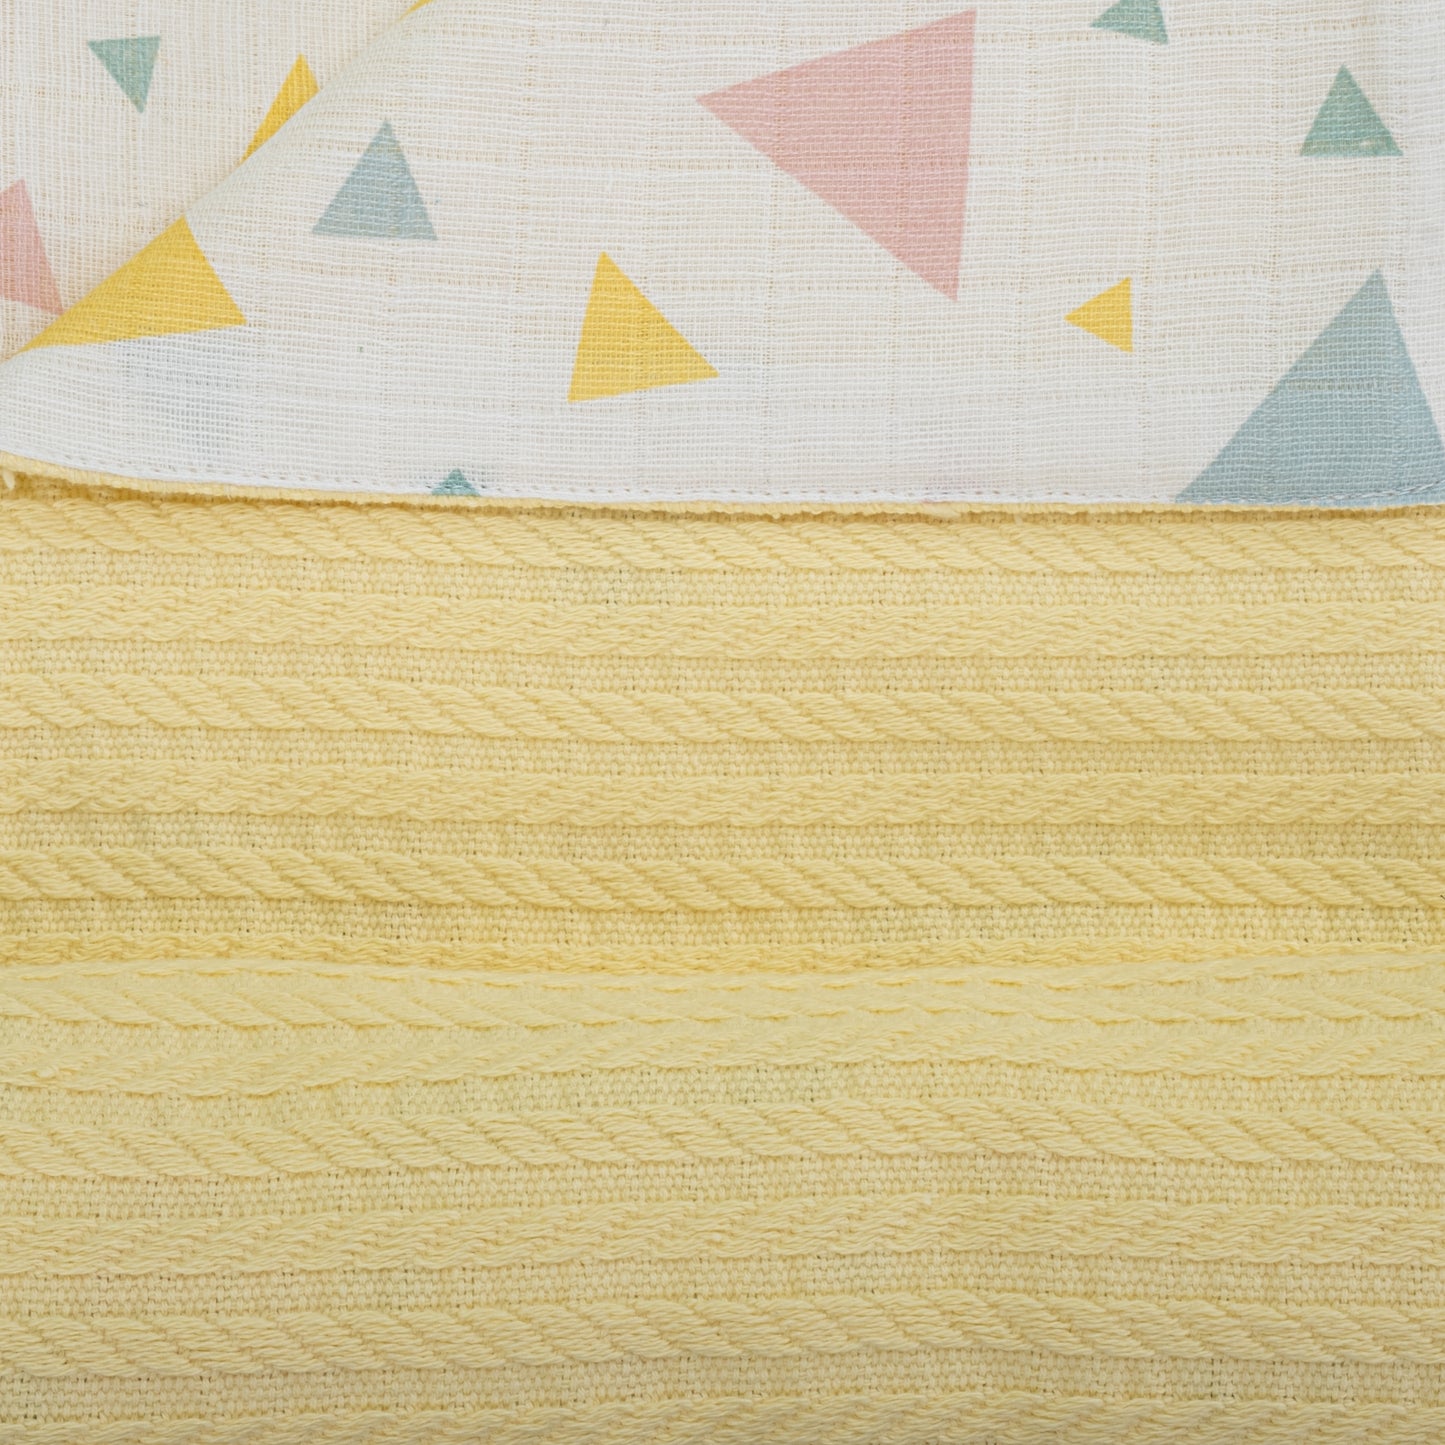 Pique Blanket - Double Side - Yellow Braid - Colored Triangles